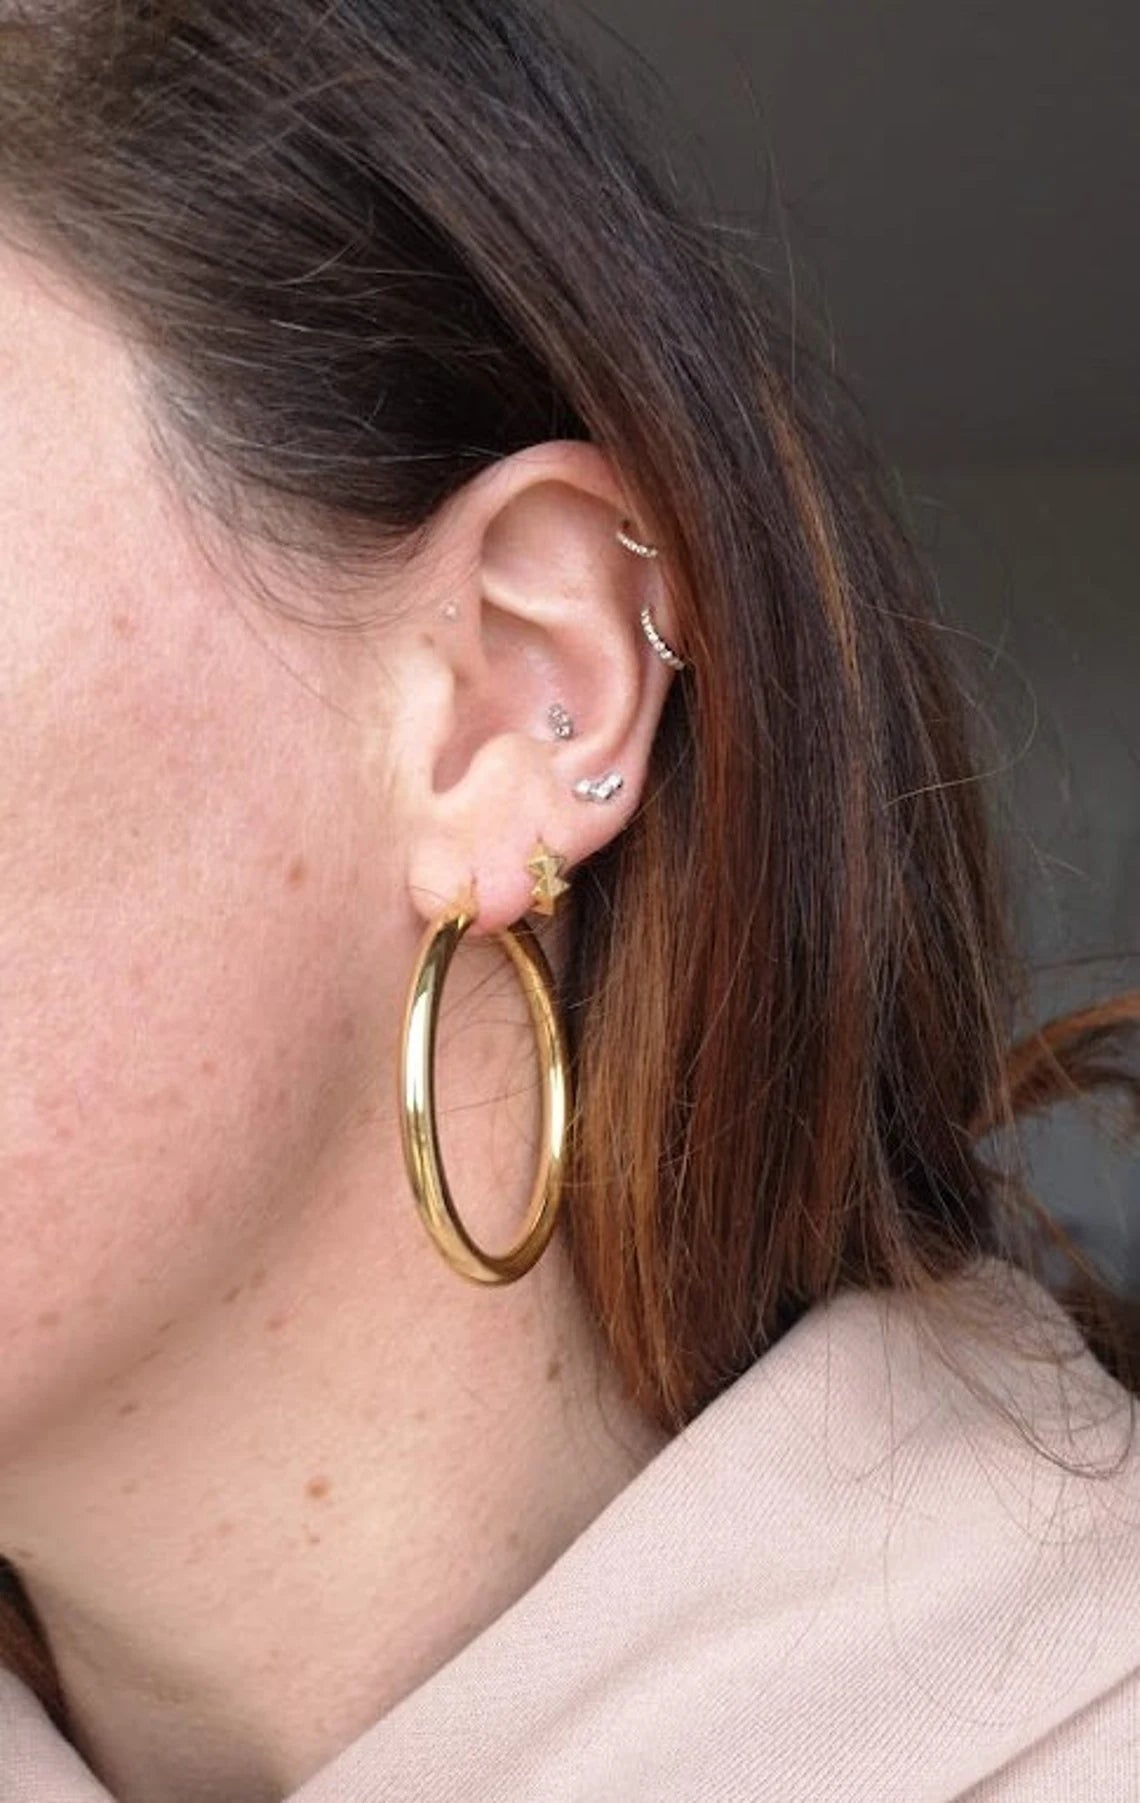 GOLD HOOPS - 50 mm hoops in solid 14K yellow gold